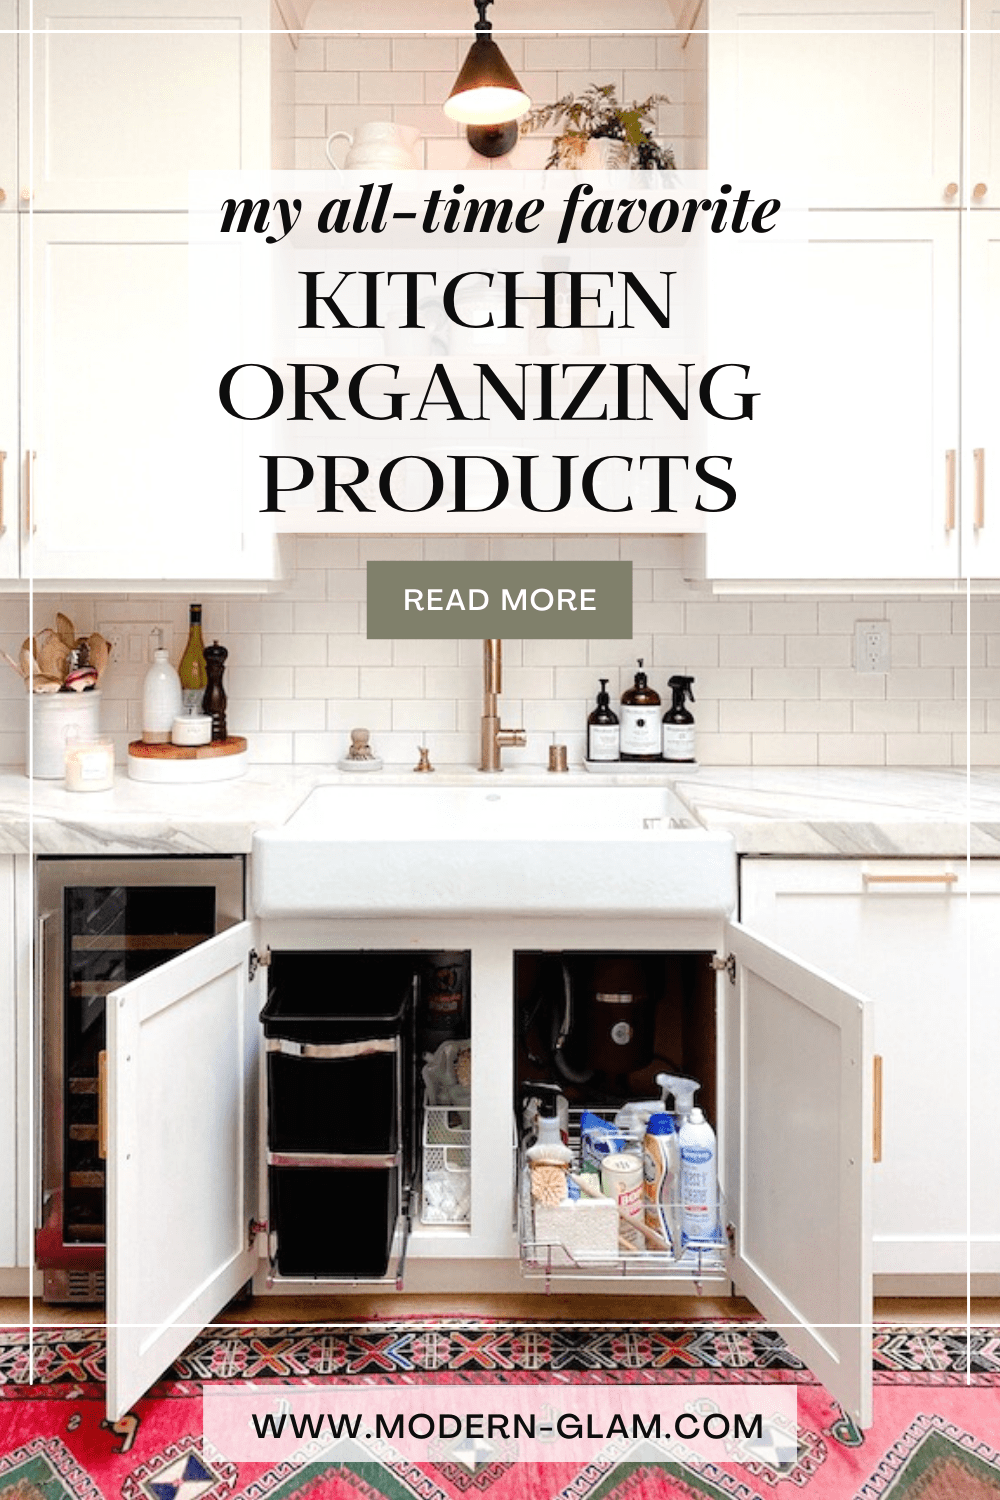 https://www.modern-glam.com/wp-content/uploads/2021/08/kitchen-organizing-products.png